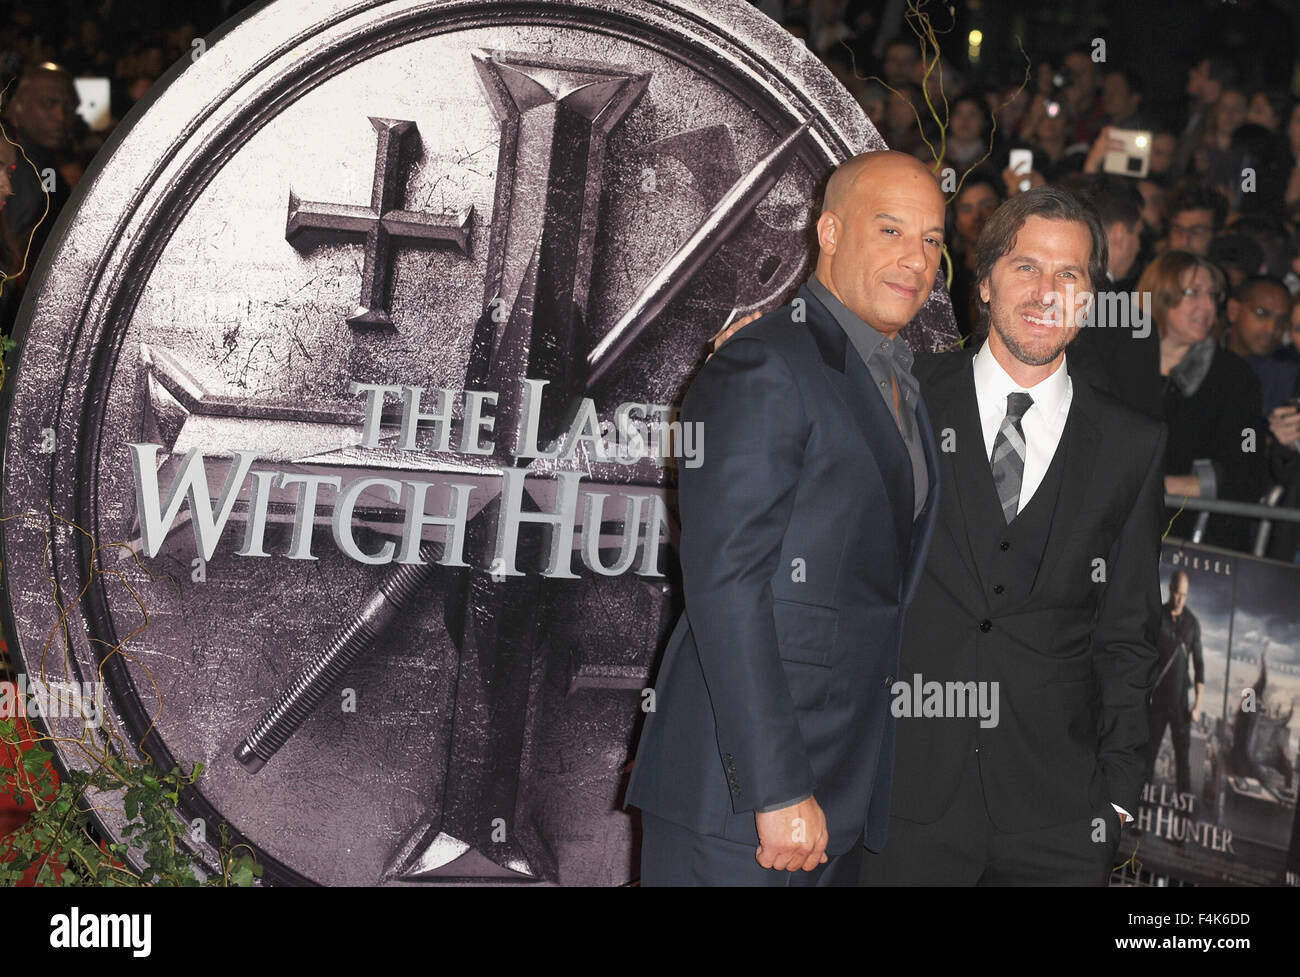 Uk, Uk. 19th Oct, 2015. Vin Diesel and Breck Eisner attends the European Premiere of 'The Last Witch Hunter' at Empire Leciester Square. © Ferdaus Shamim/ZUMA Wire/Alamy Live News Stock Photo